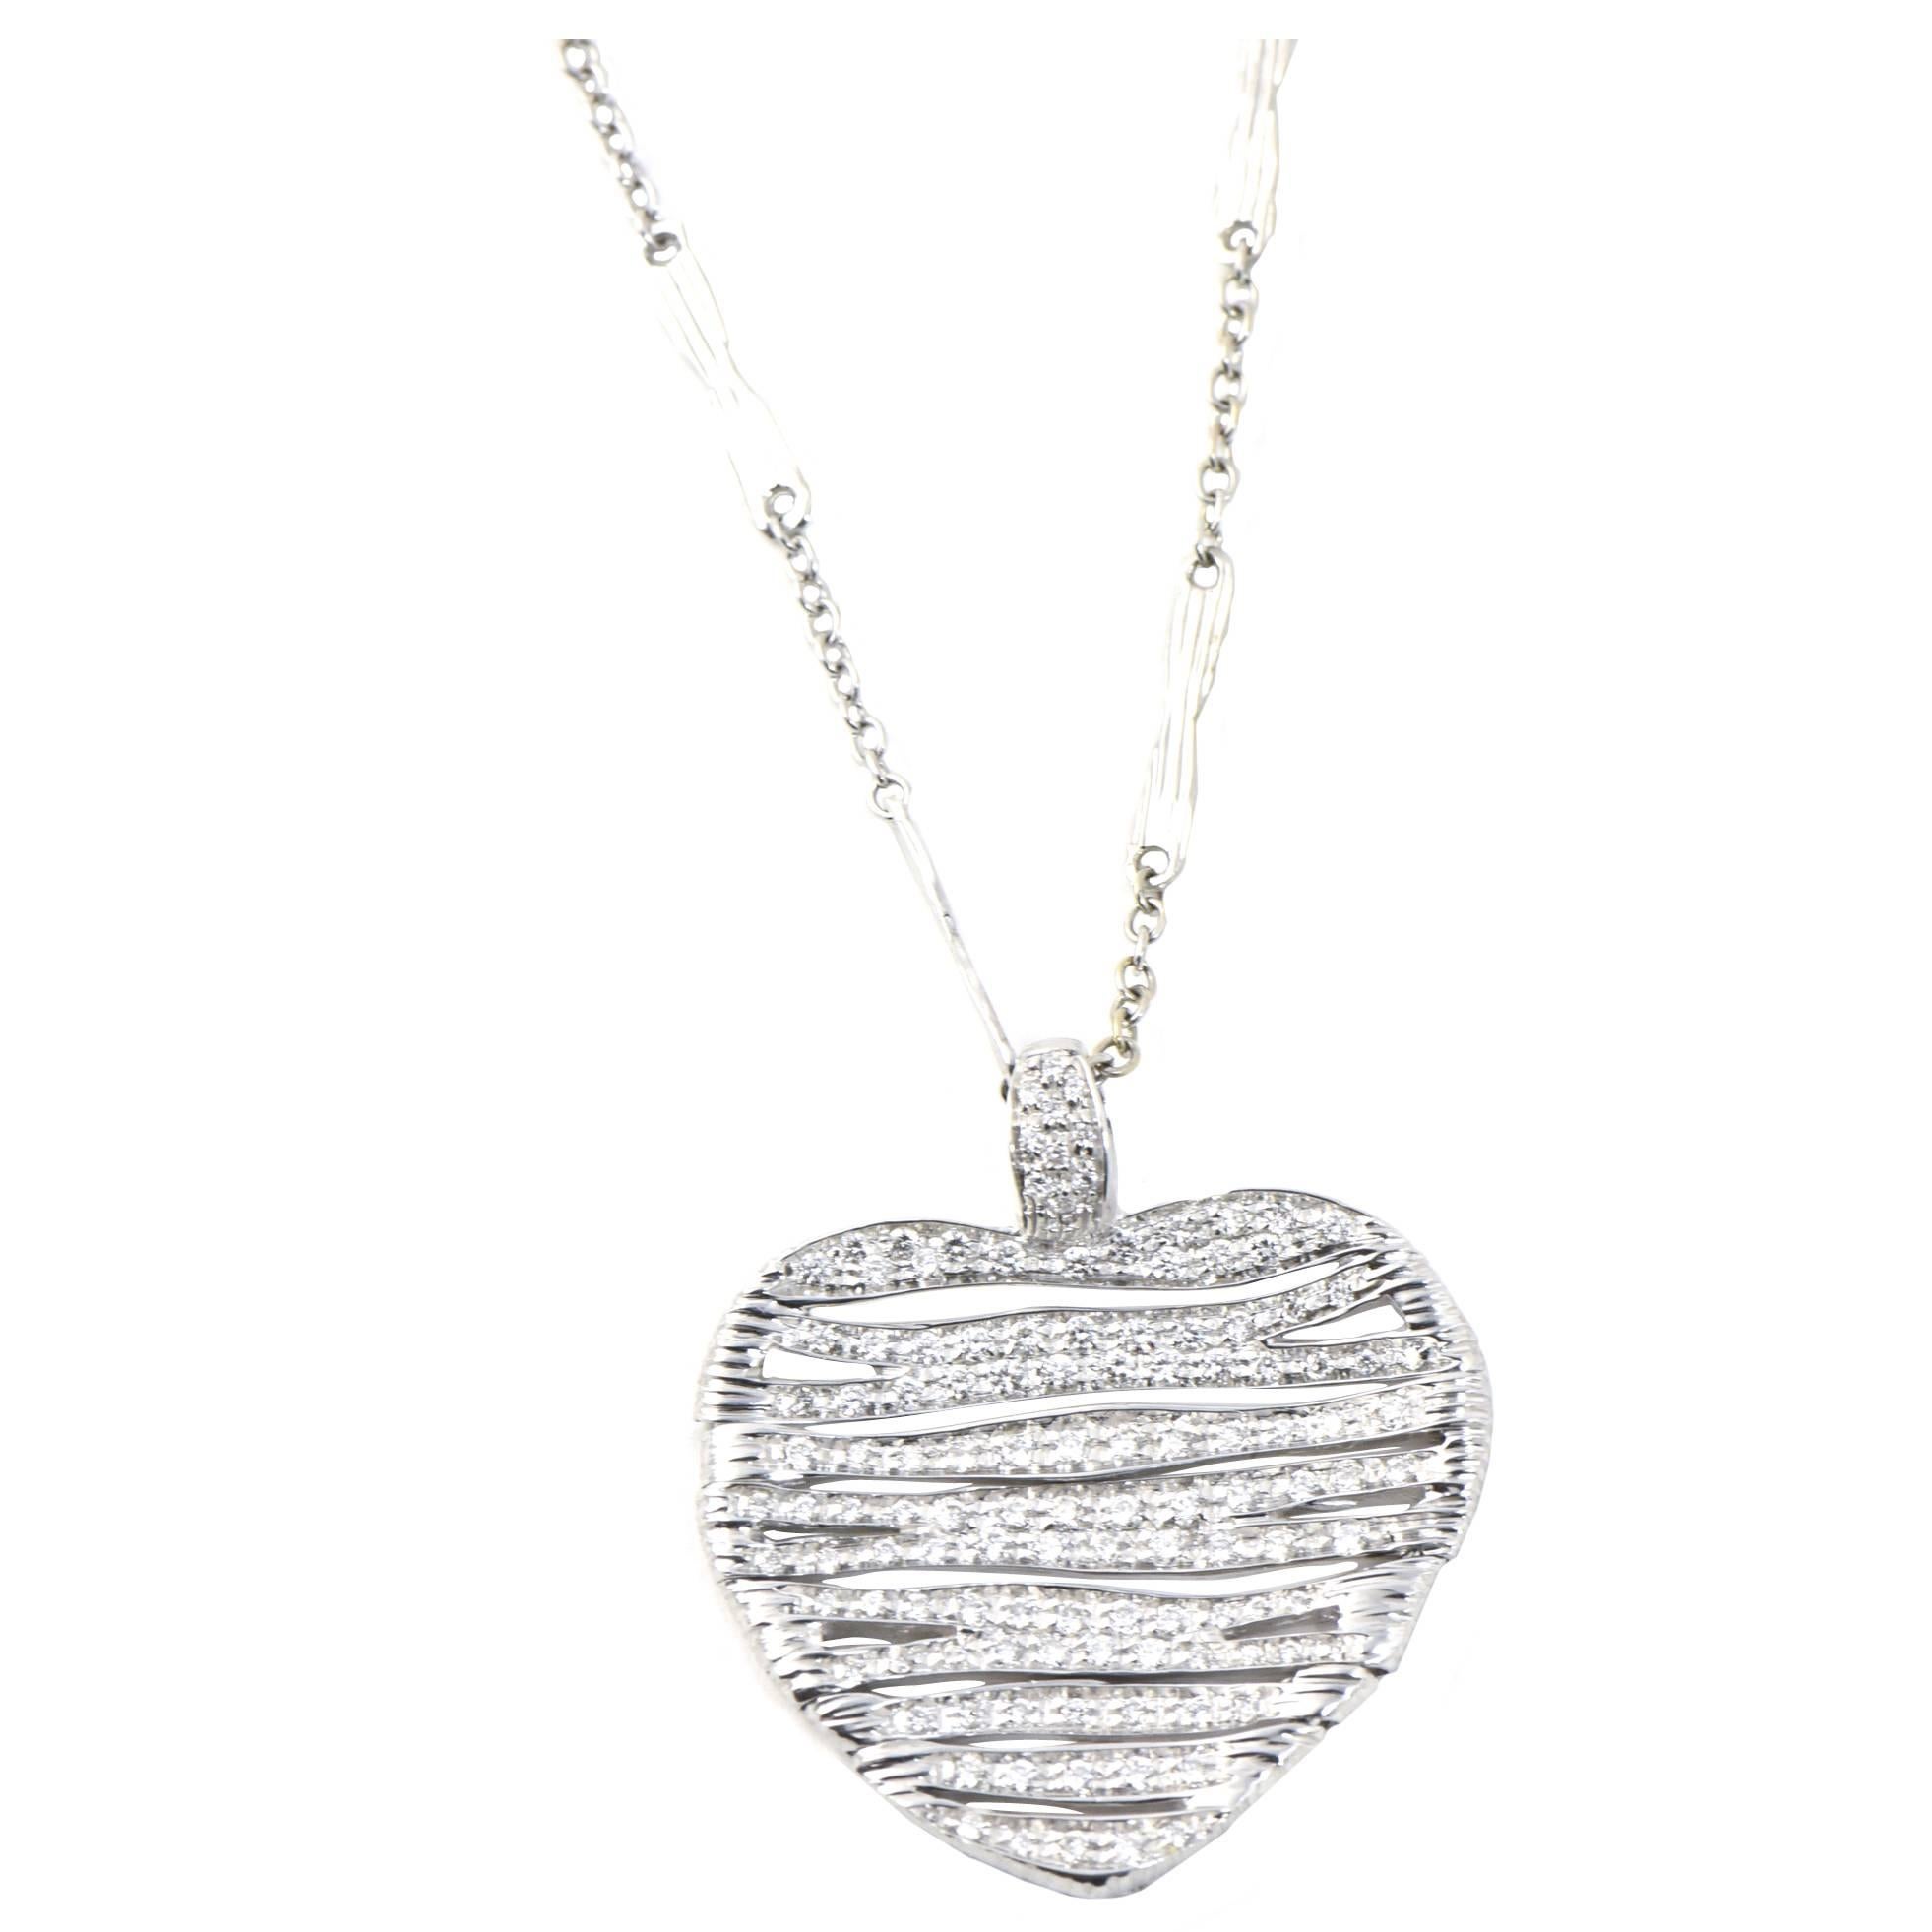 Roberto Coin Diamond Gold Heart Necklace from Elefantino Collection